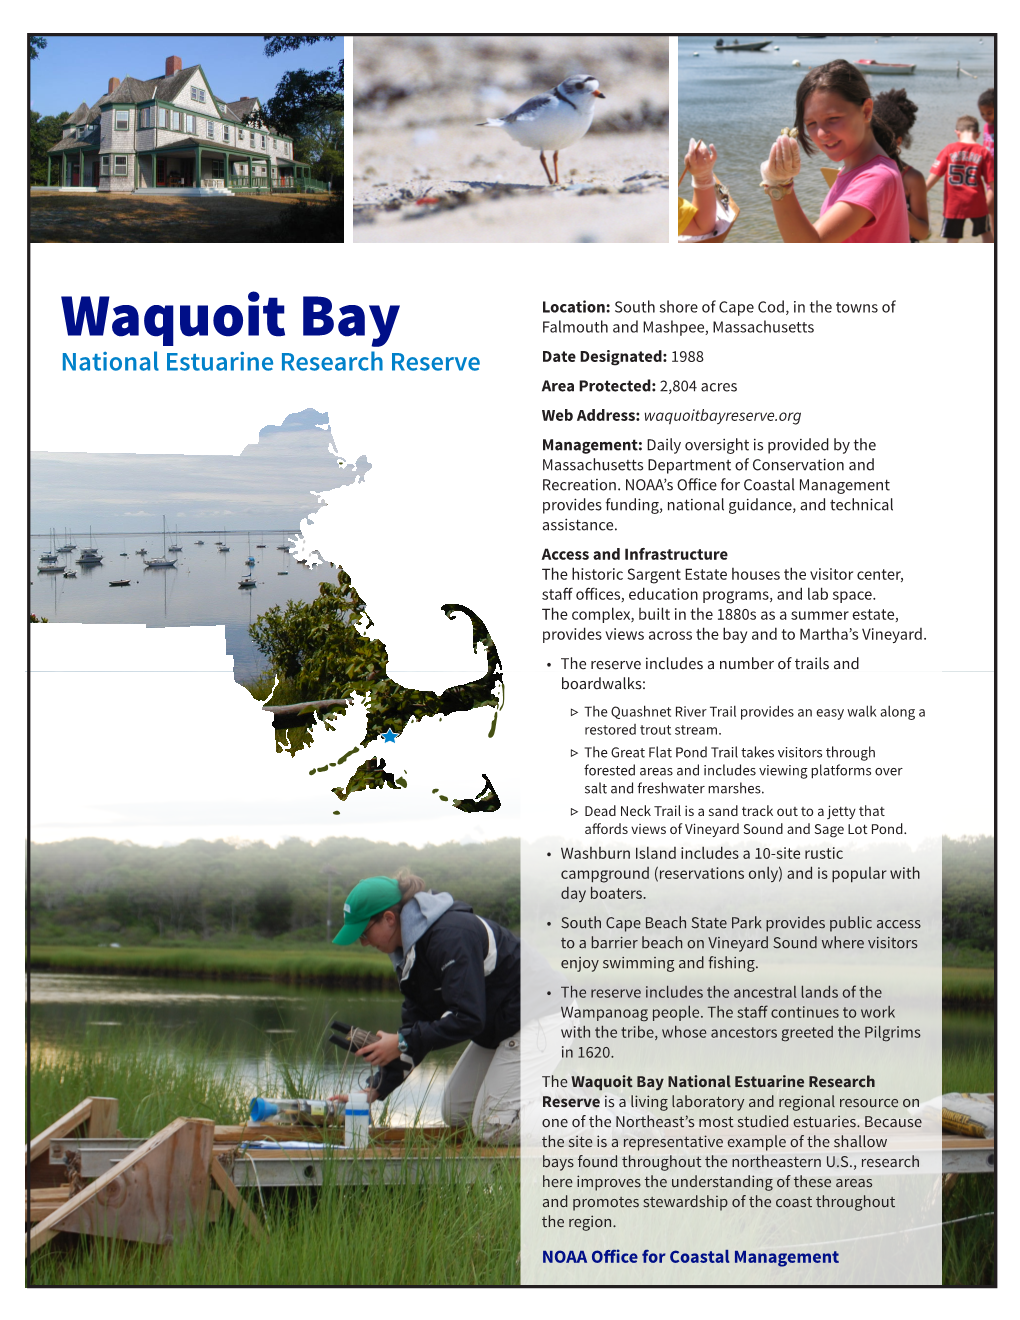 The Waquoit Bay National Estuarine Research Reserve Is a Living Laboratory and Regional Resource on One of the Northeast’S Most Studied Estuaries